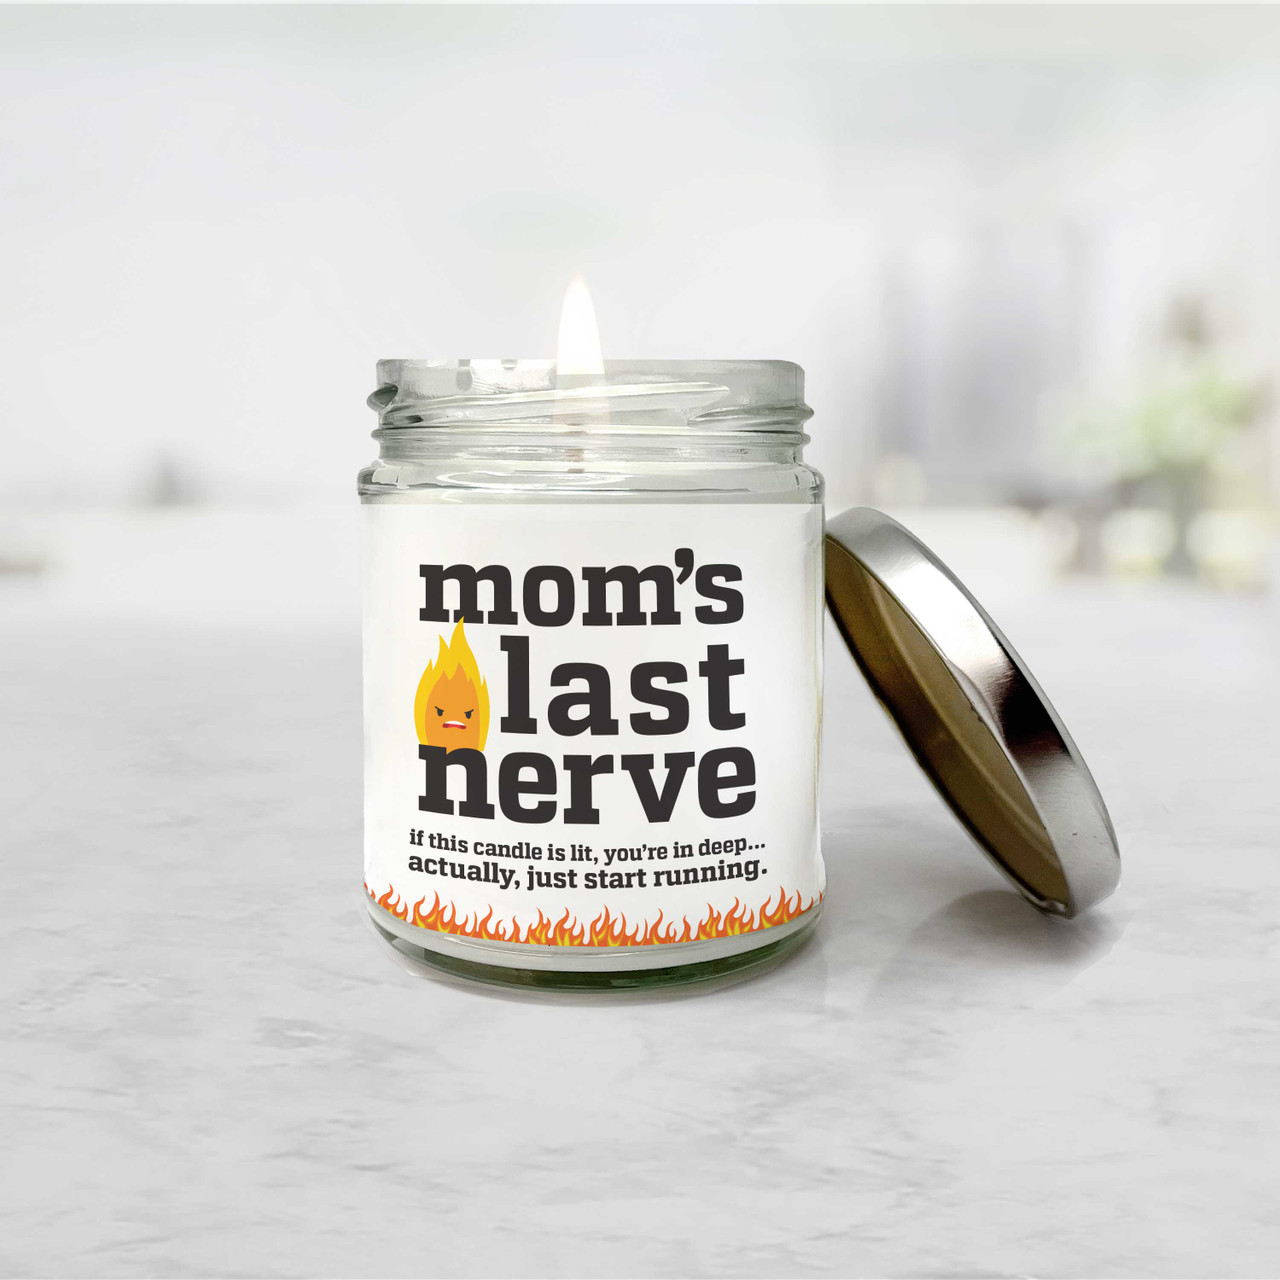 Funny Mom Gifts, Gifts for Mom from Daughter Son, Moms Last Nerve, Funny  Jar Candle, Funny Mother's Day Gifts, Moms Birthday Gift, Gag Gift for Mom